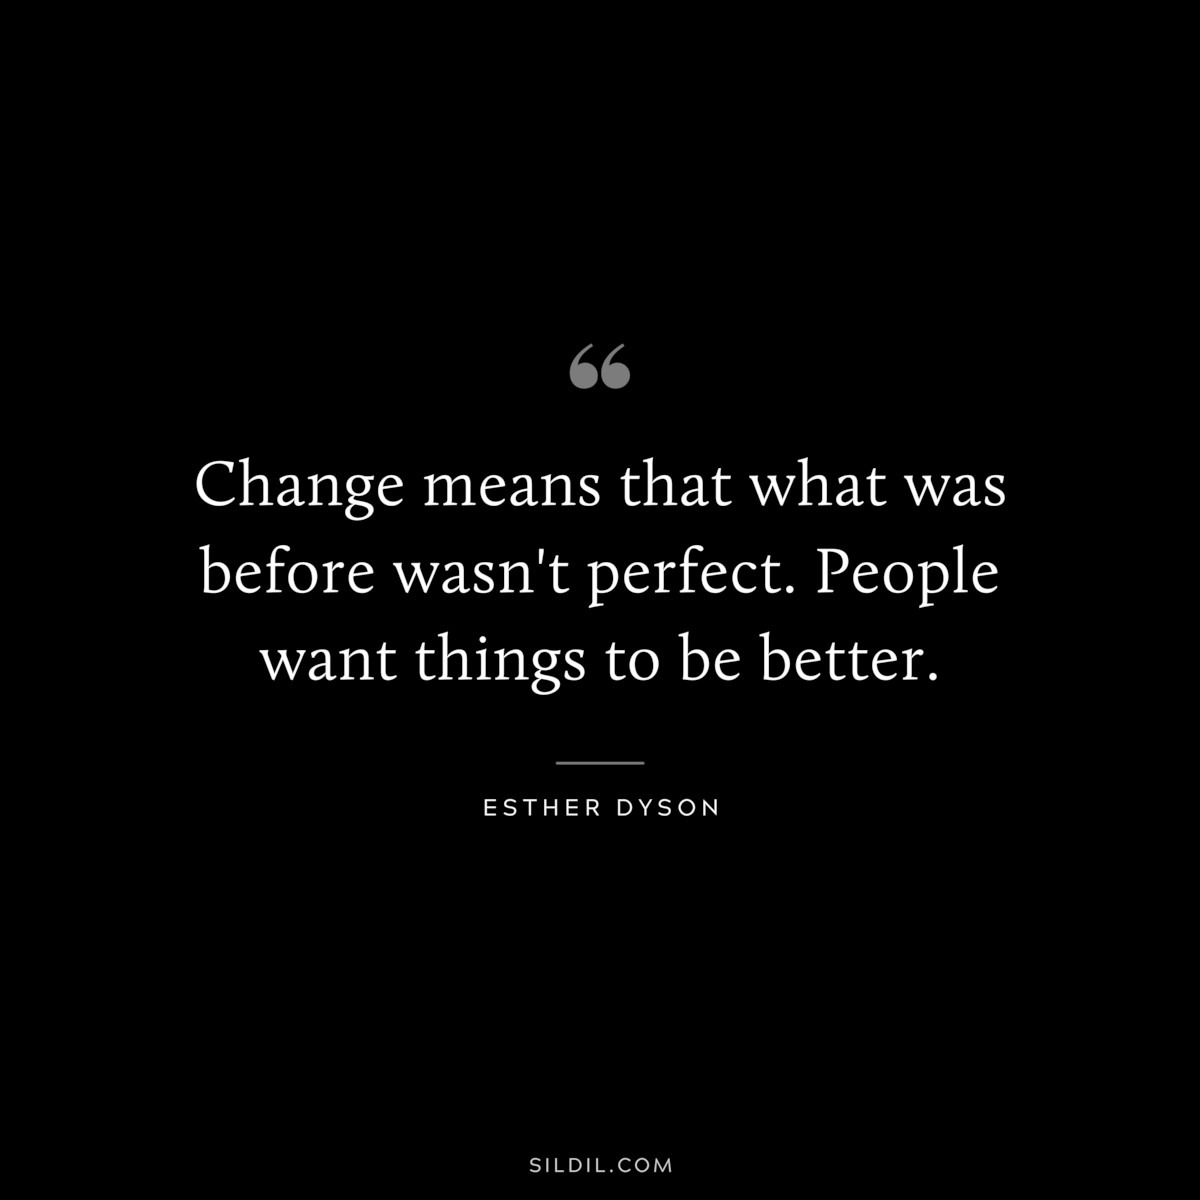 Change means that what was before wasn't perfect. People want things to be better. ― Esther Dyson